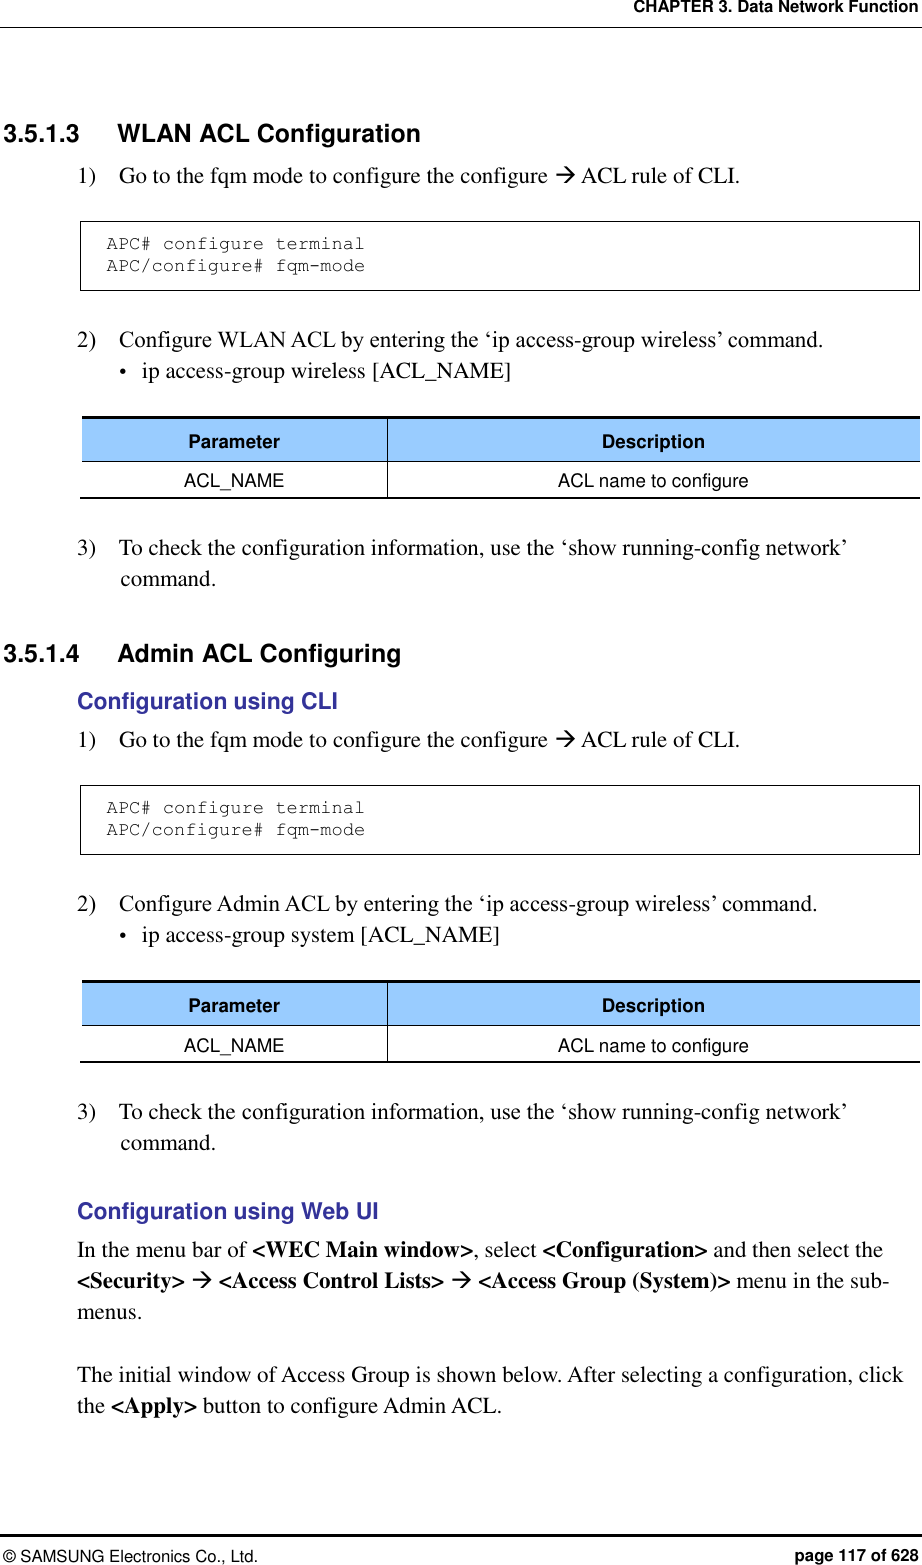 CHAPTER 3. Data Network Function ©  SAMSUNG Electronics Co., Ltd.  page 117 of 628 3.5.1.3  WLAN ACL Configuration 1)    Go to the fqm mode to configure the configure  ACL rule of CLI.  APC# configure terminal APC/configure# fqm-mode  2)    Configure WLAN ACL by entering the ‘ip access-group wireless’ command.    ip access-group wireless [ACL_NAME]  Parameter Description ACL_NAME ACL name to configure  3)    To check the configuration information, use the ‘show running-config network’ command.  3.5.1.4  Admin ACL Configuring Configuration using CLI 1)    Go to the fqm mode to configure the configure  ACL rule of CLI.  APC# configure terminal APC/configure# fqm-mode  2)    Configure Admin ACL by entering the ‘ip access-group wireless’ command.  ip access-group system [ACL_NAME]  Parameter Description ACL_NAME ACL name to configure  3)    To check the configuration information, use the ‘show running-config network’ command.  Configuration using Web UI In the menu bar of &lt;WEC Main window&gt;, select &lt;Configuration&gt; and then select the &lt;Security&gt;  &lt;Access Control Lists&gt;  &lt;Access Group (System)&gt; menu in the sub-menus.  The initial window of Access Group is shown below. After selecting a configuration, click the &lt;Apply&gt; button to configure Admin ACL. 